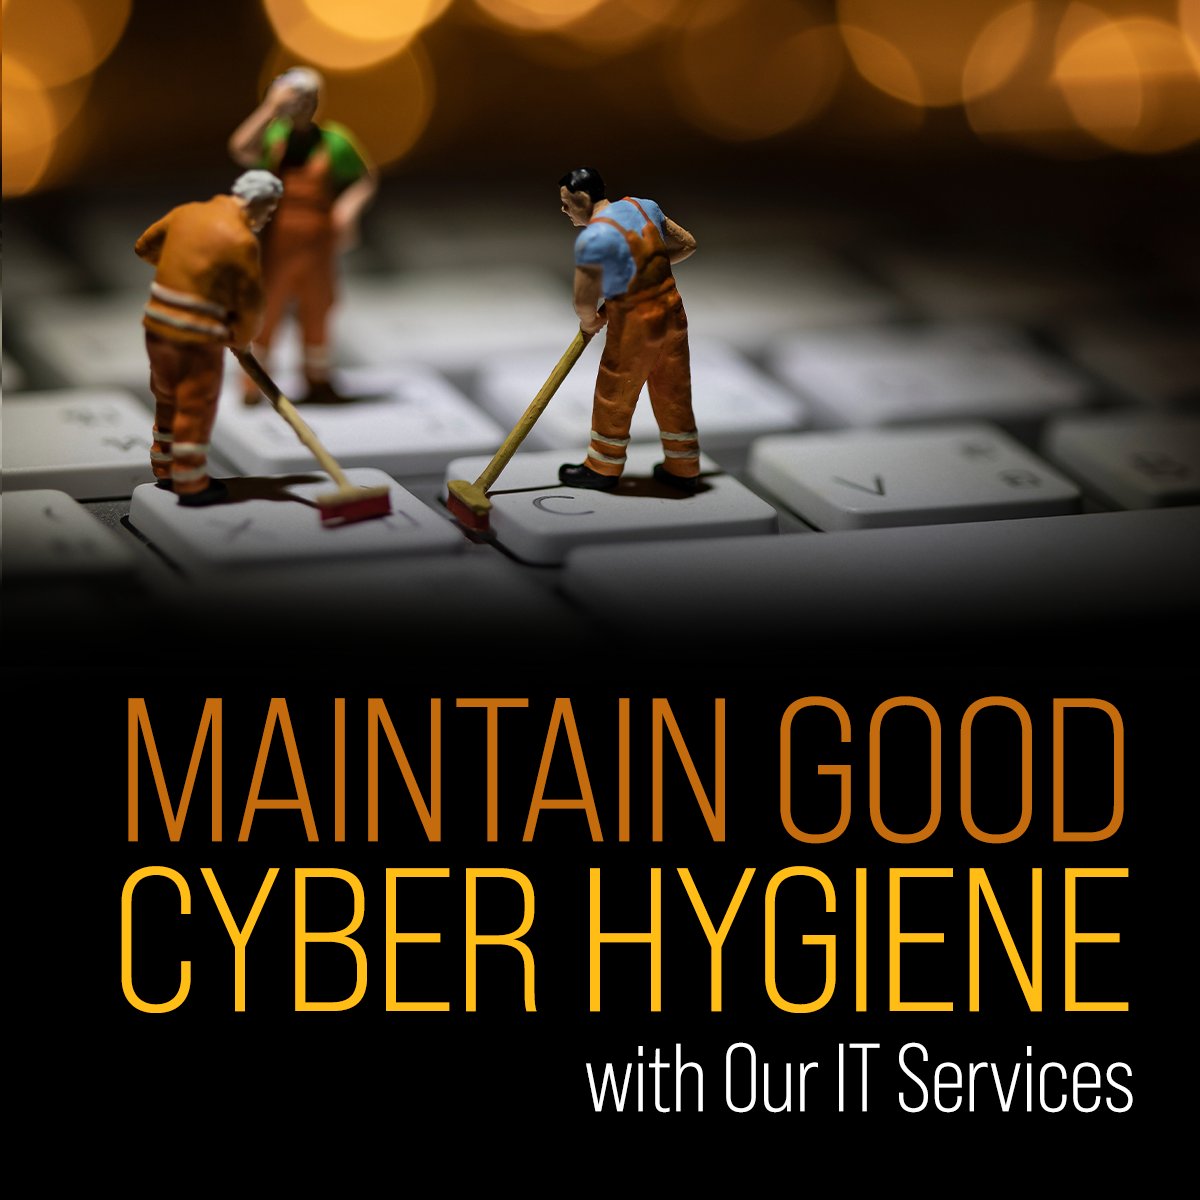 Good cyber hygiene is essential for any business. Let us help you maintain it with our IT services. ow.ly/HF1S50Ol3Nx
#DartTech #DartMSP #BusinessContinuity #NetworkSecurity #cybersecurity #ITSecurity #ITManagedServices #CyberHygiene